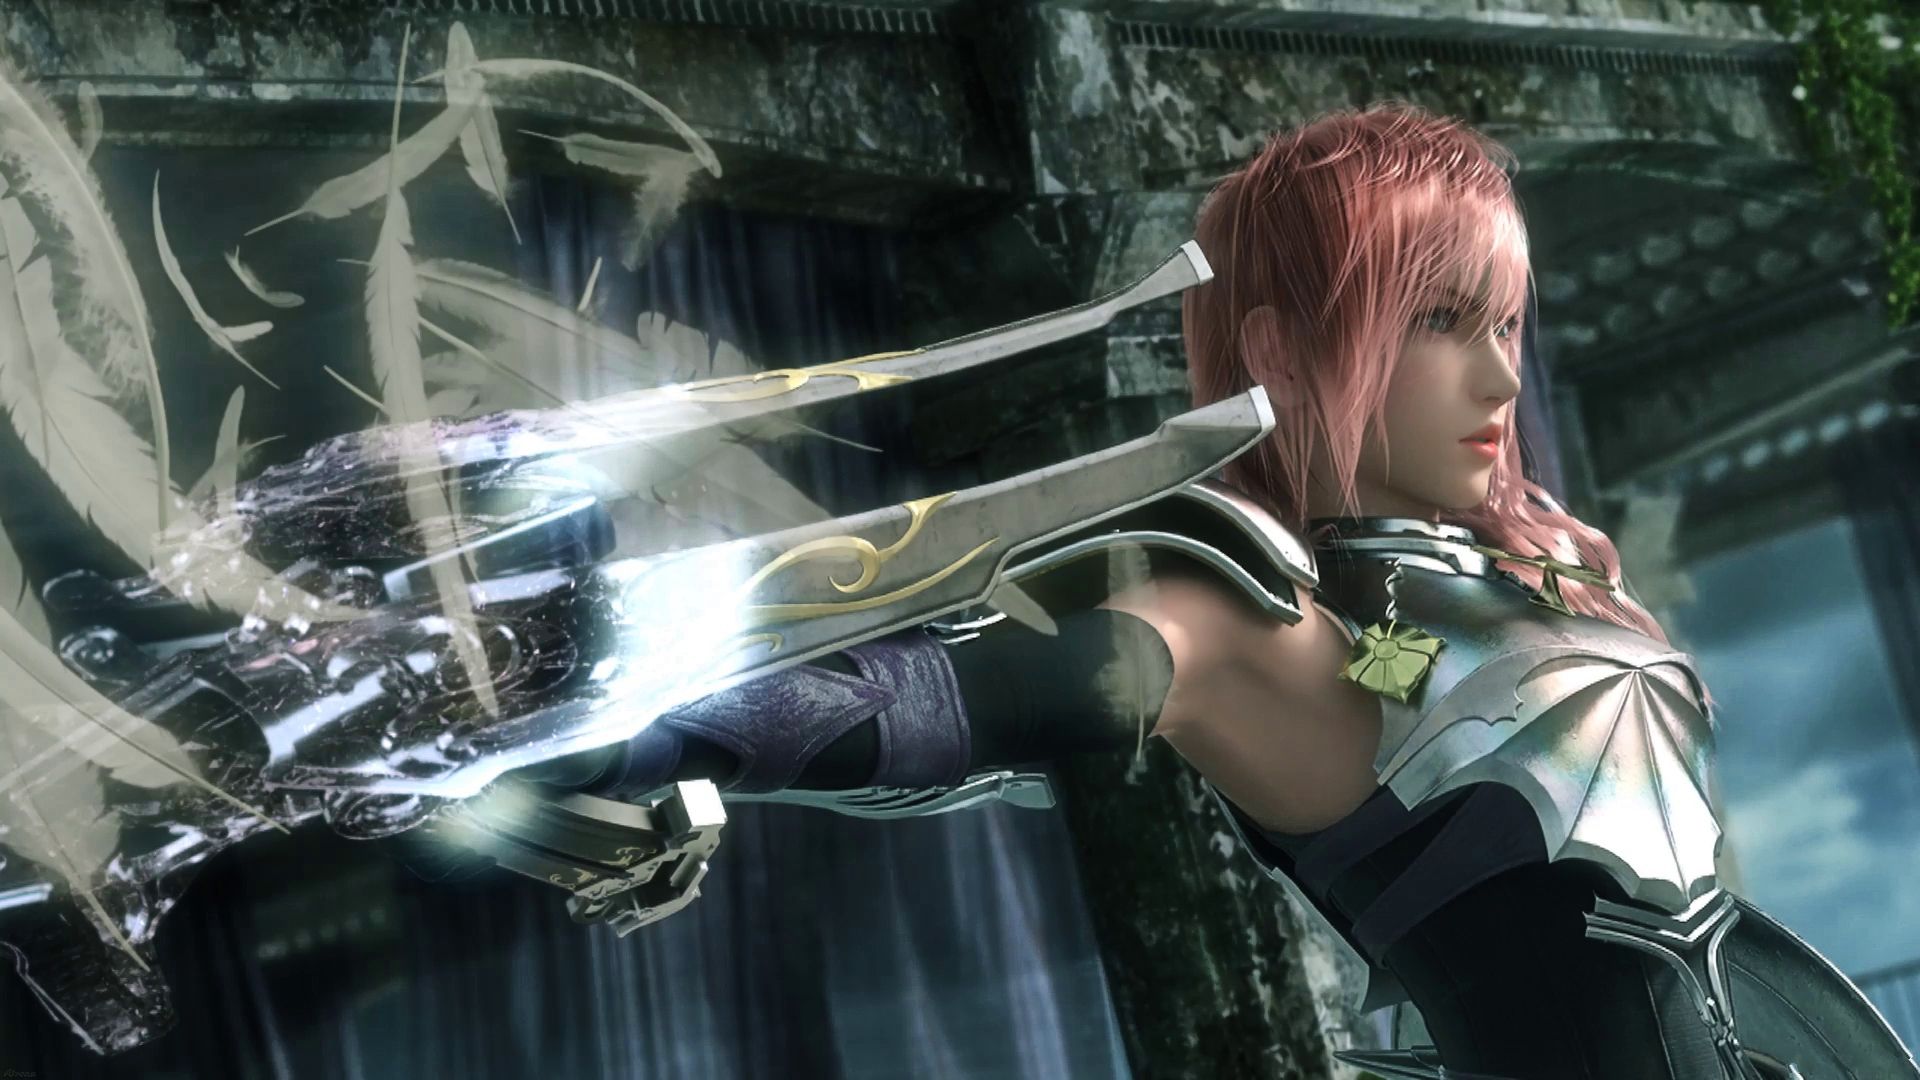 Final Fantasy XIII 2 Wallpapers Free Downloads inMotion Gaming